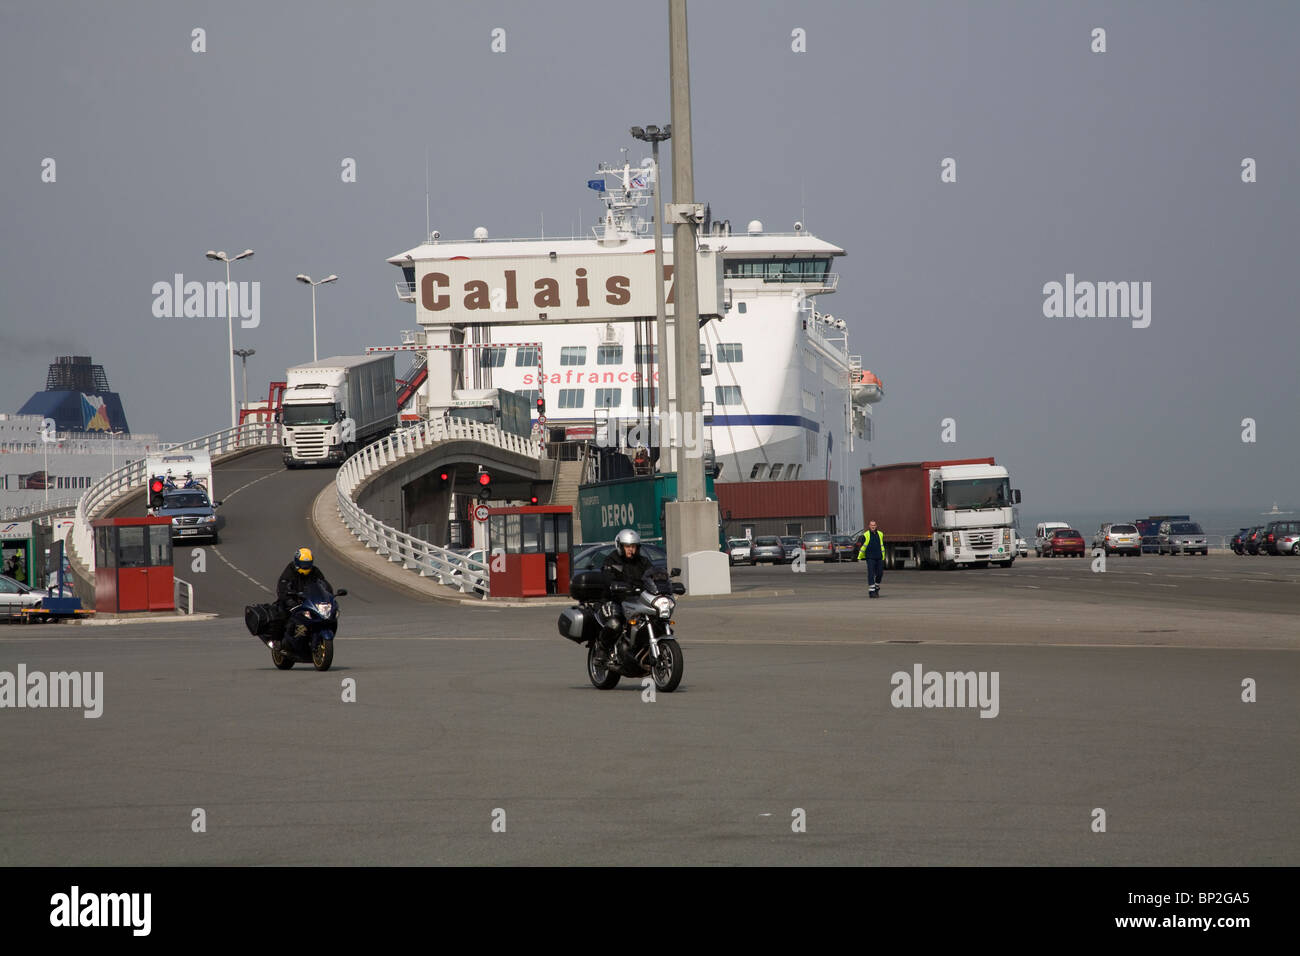 Calais France Europe EU Motorbikes cars and lorries disembarking from a Sea France Ferry in the Port Stock Photo